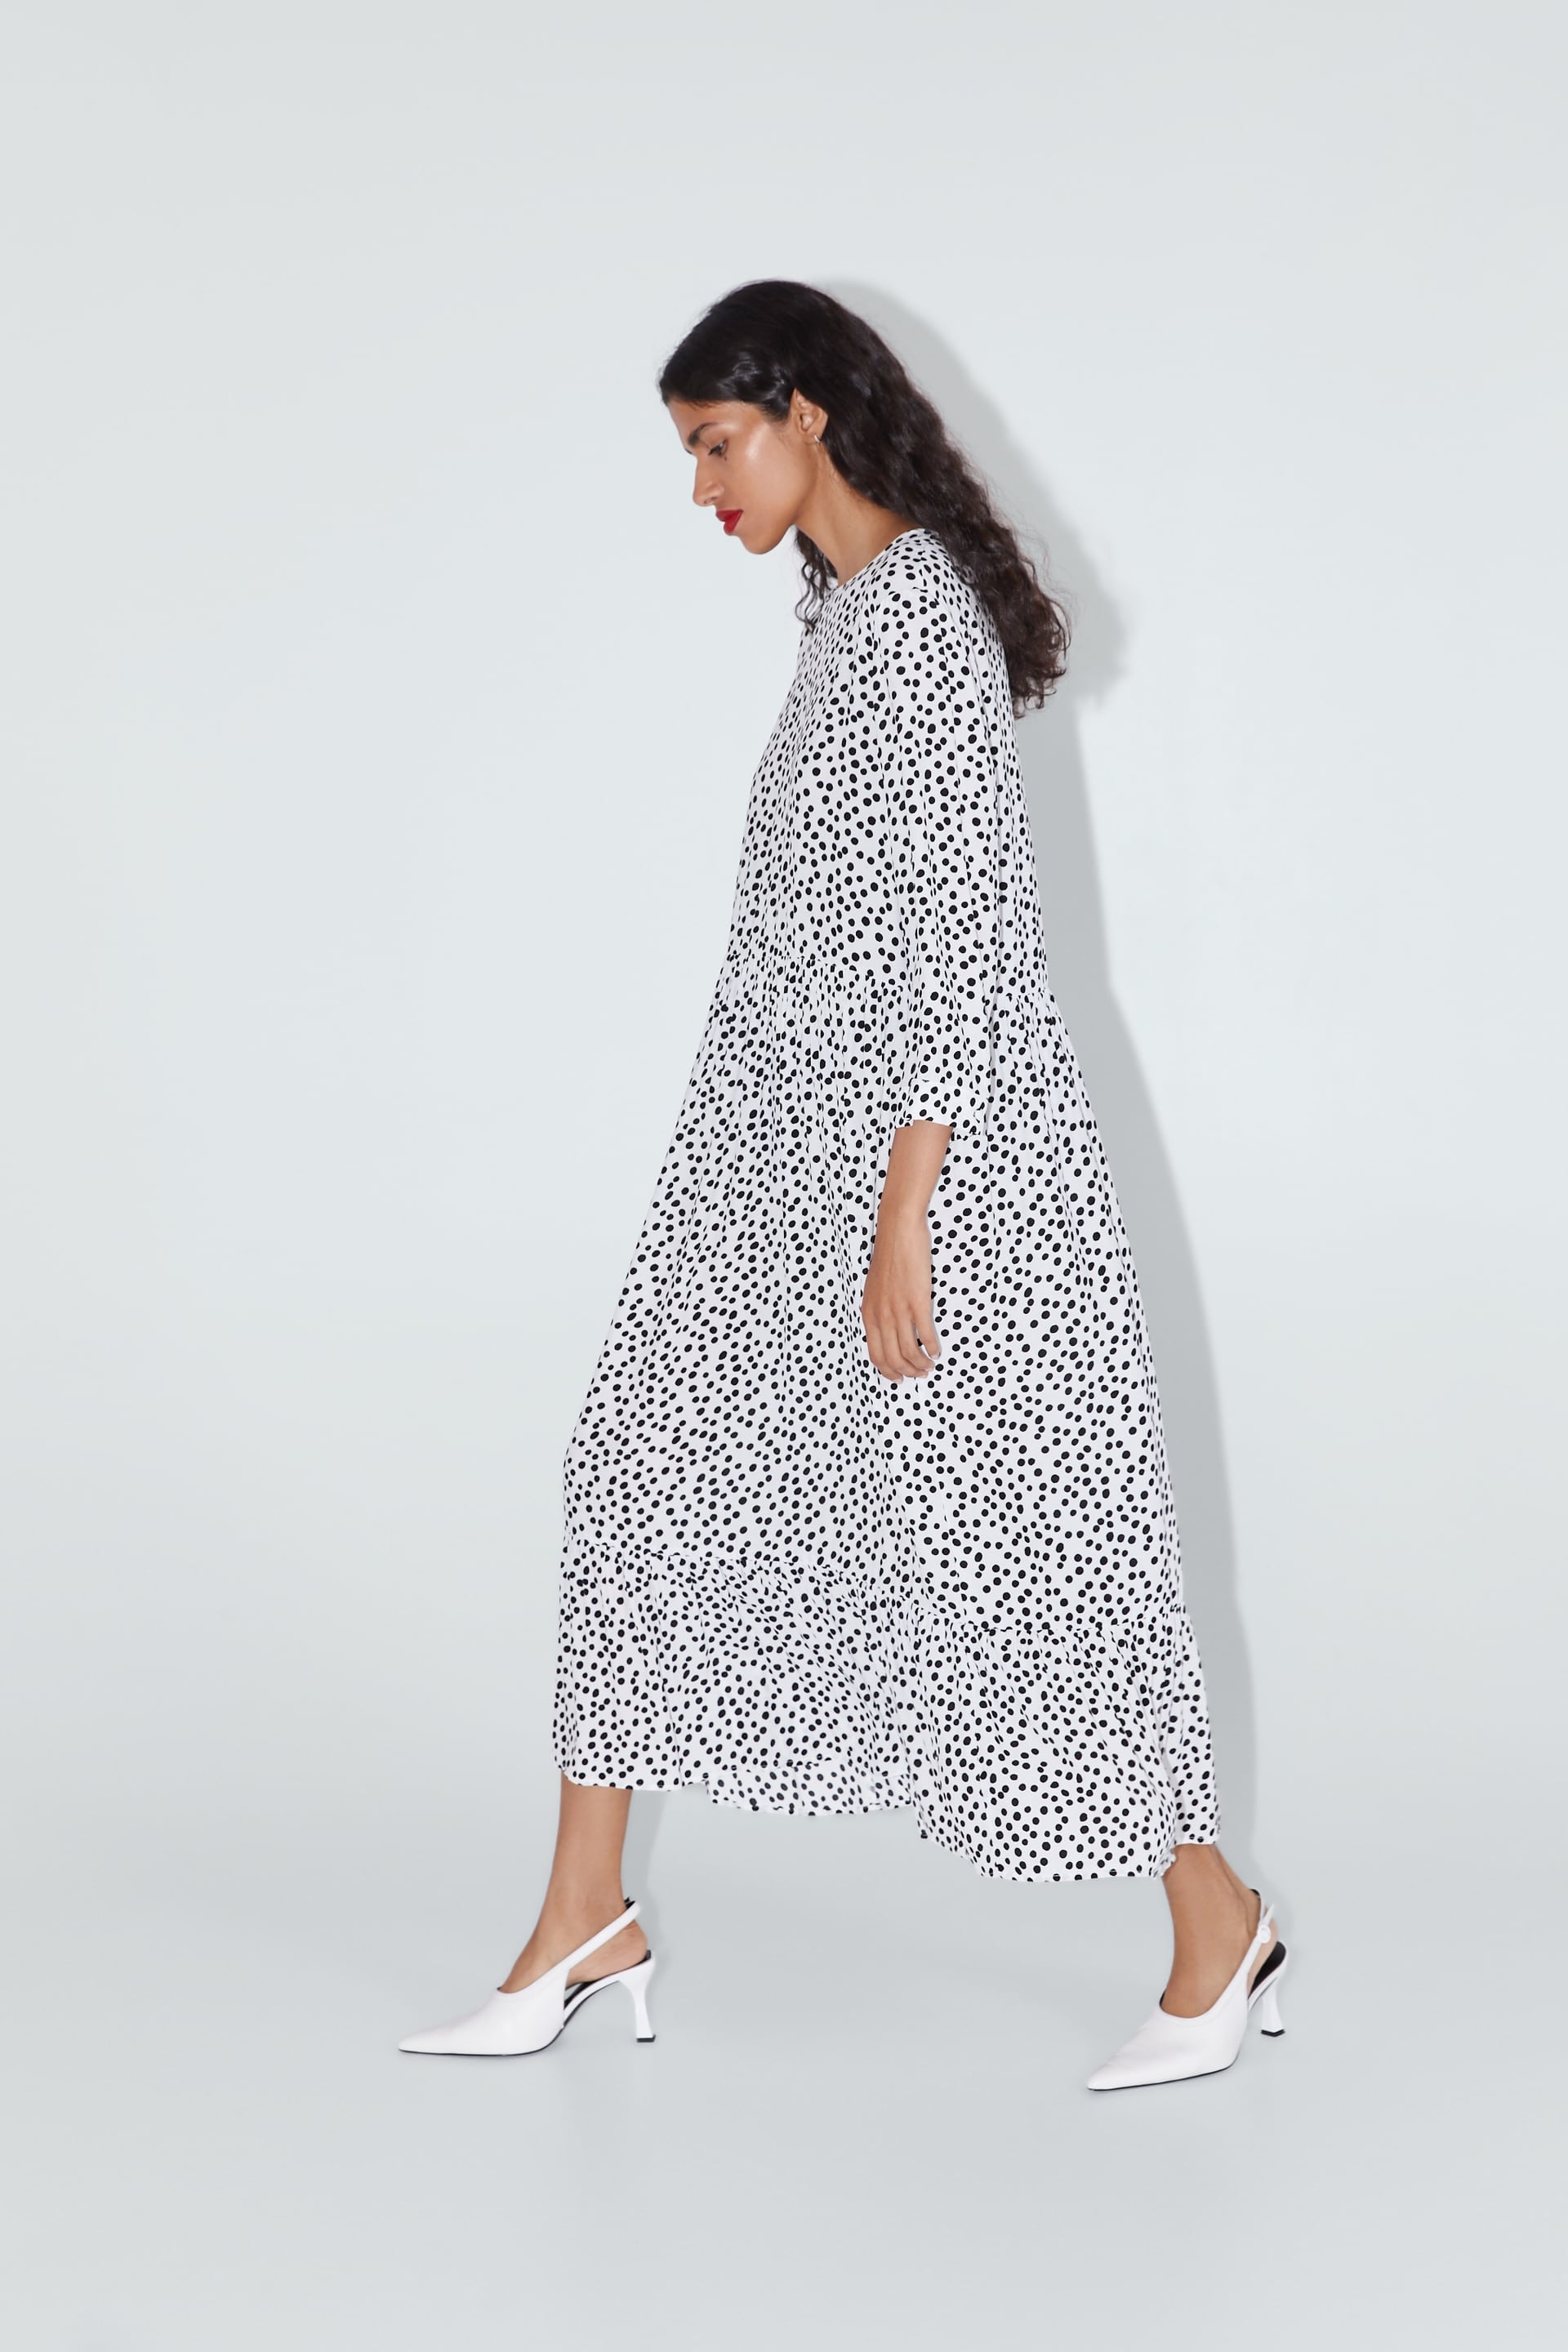 The Polka-Dot Dress From Zara That Went ...